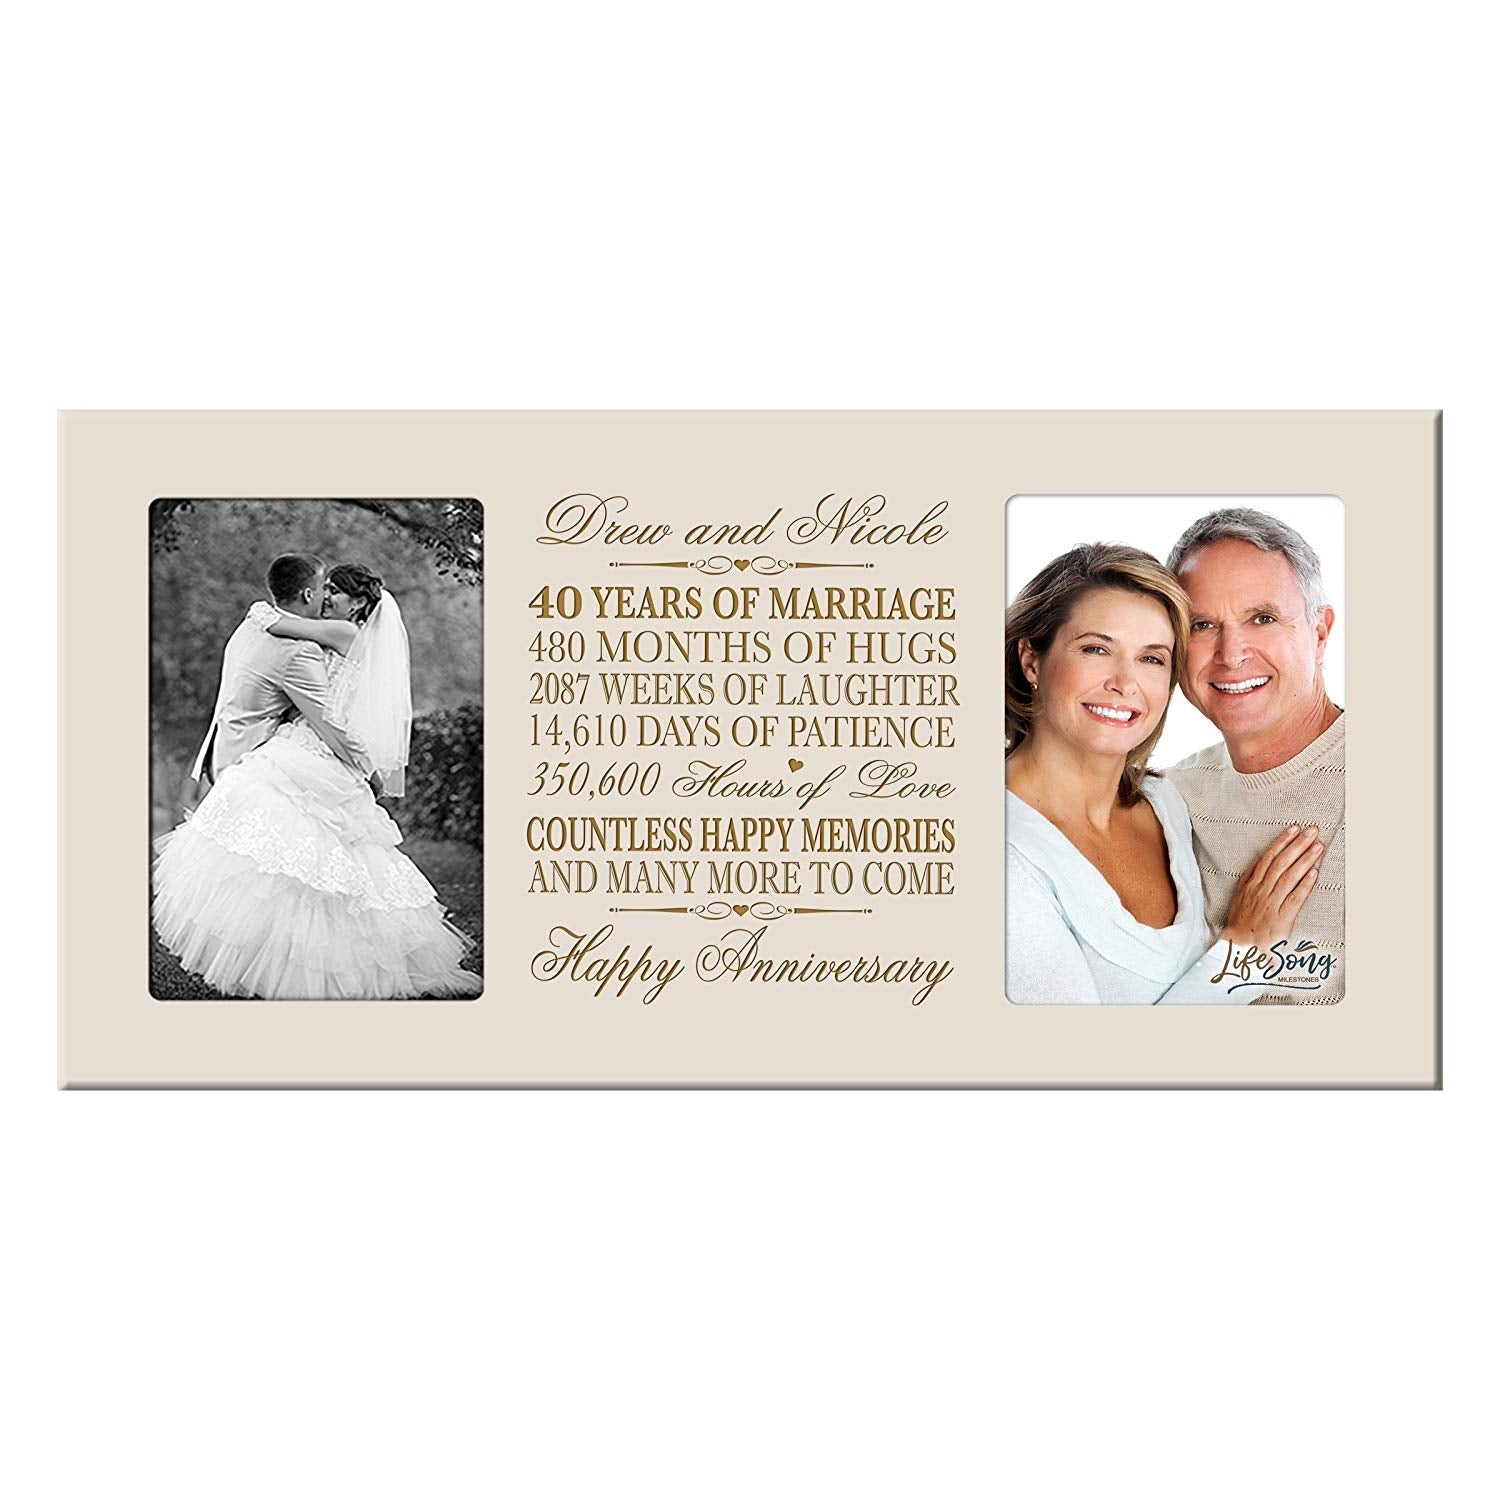 Personalized 40th Anniversary Double Photo Frame - Happy Anniversary - LifeSong Milestones